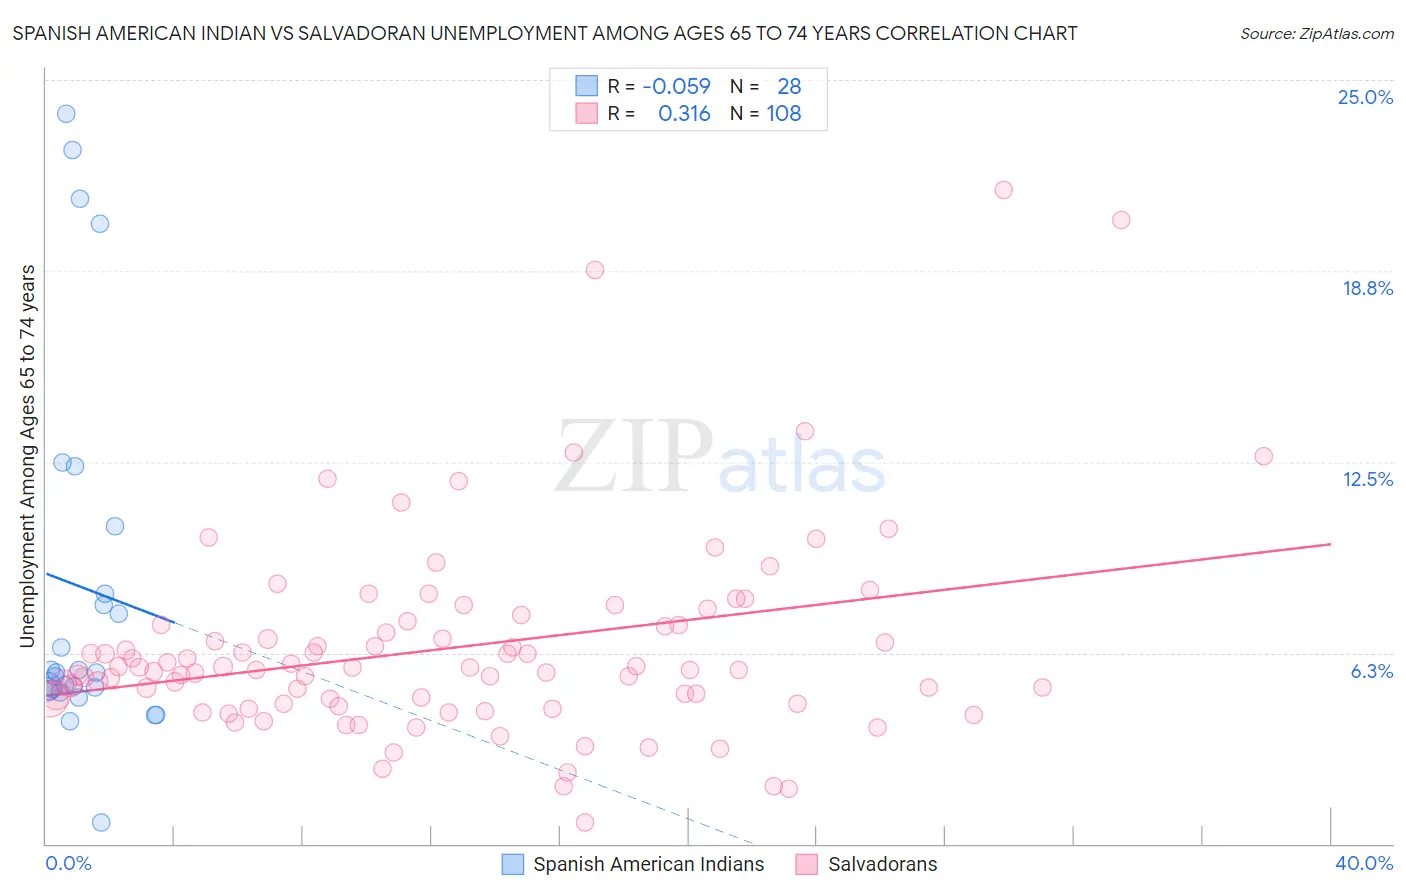 Spanish American Indian vs Salvadoran Unemployment Among Ages 65 to 74 years